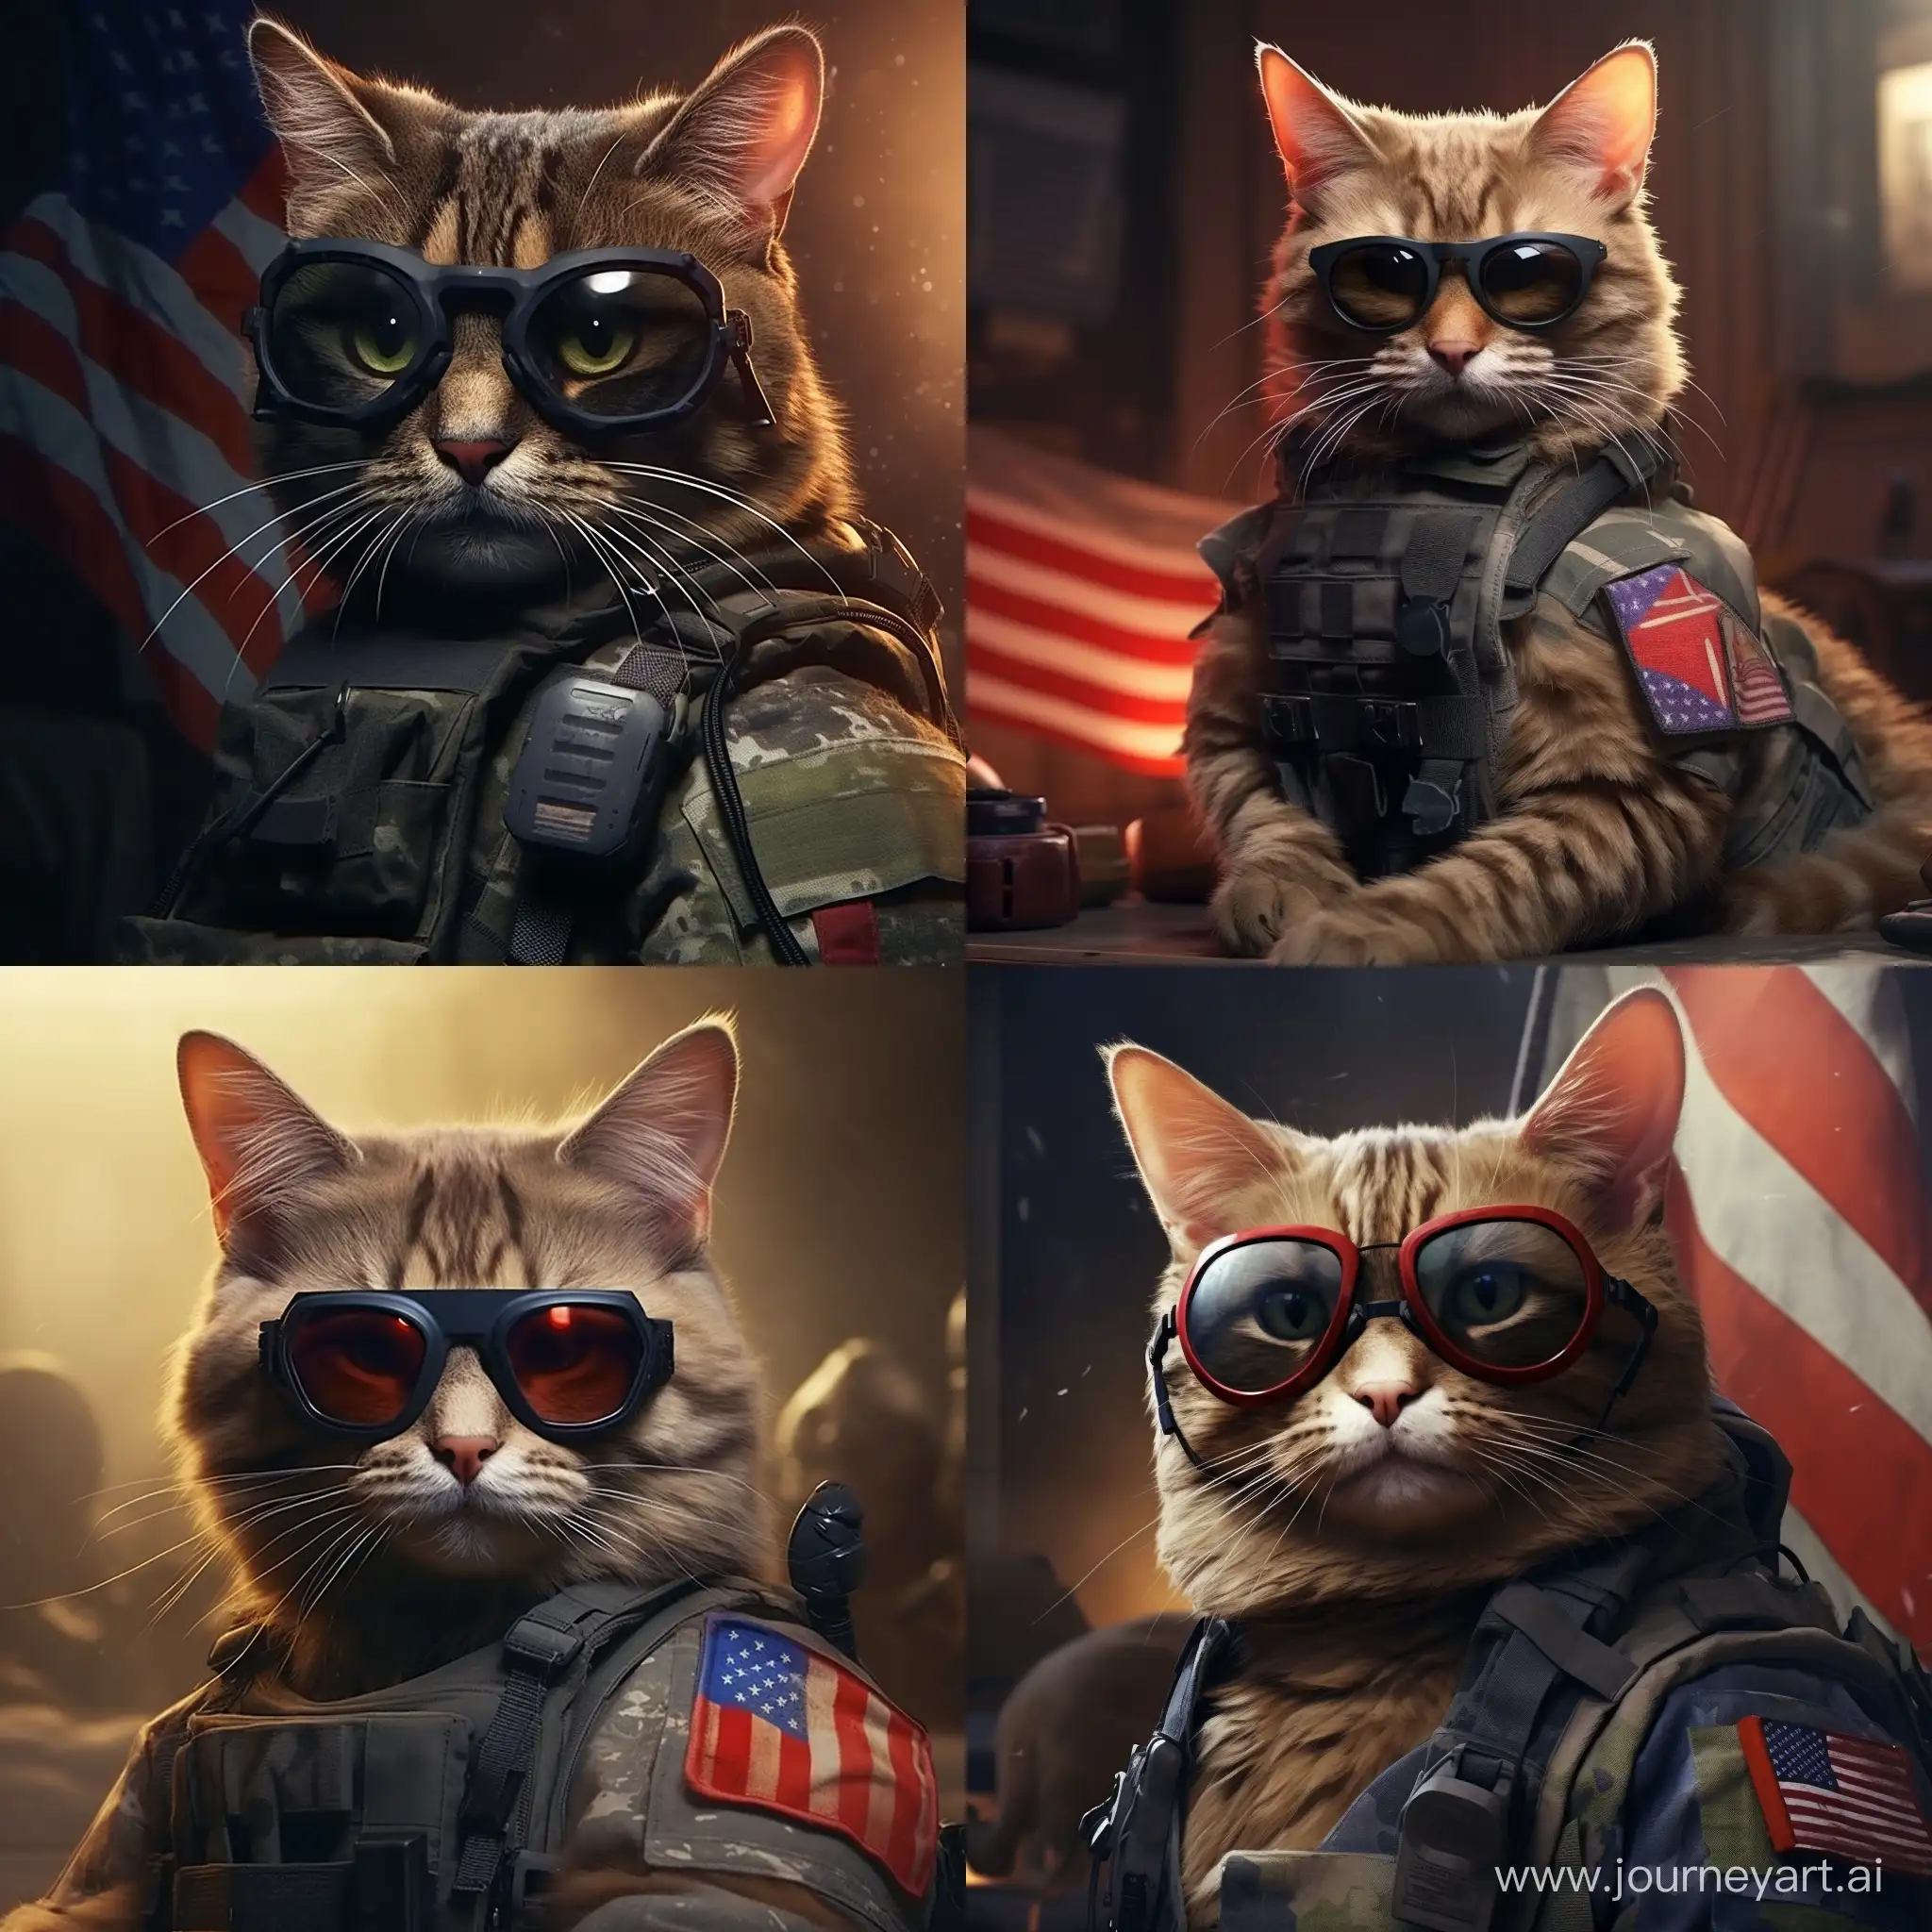 Realistic-Cat-in-Tactical-Military-Attire-with-Russian-Flag-and-Patch